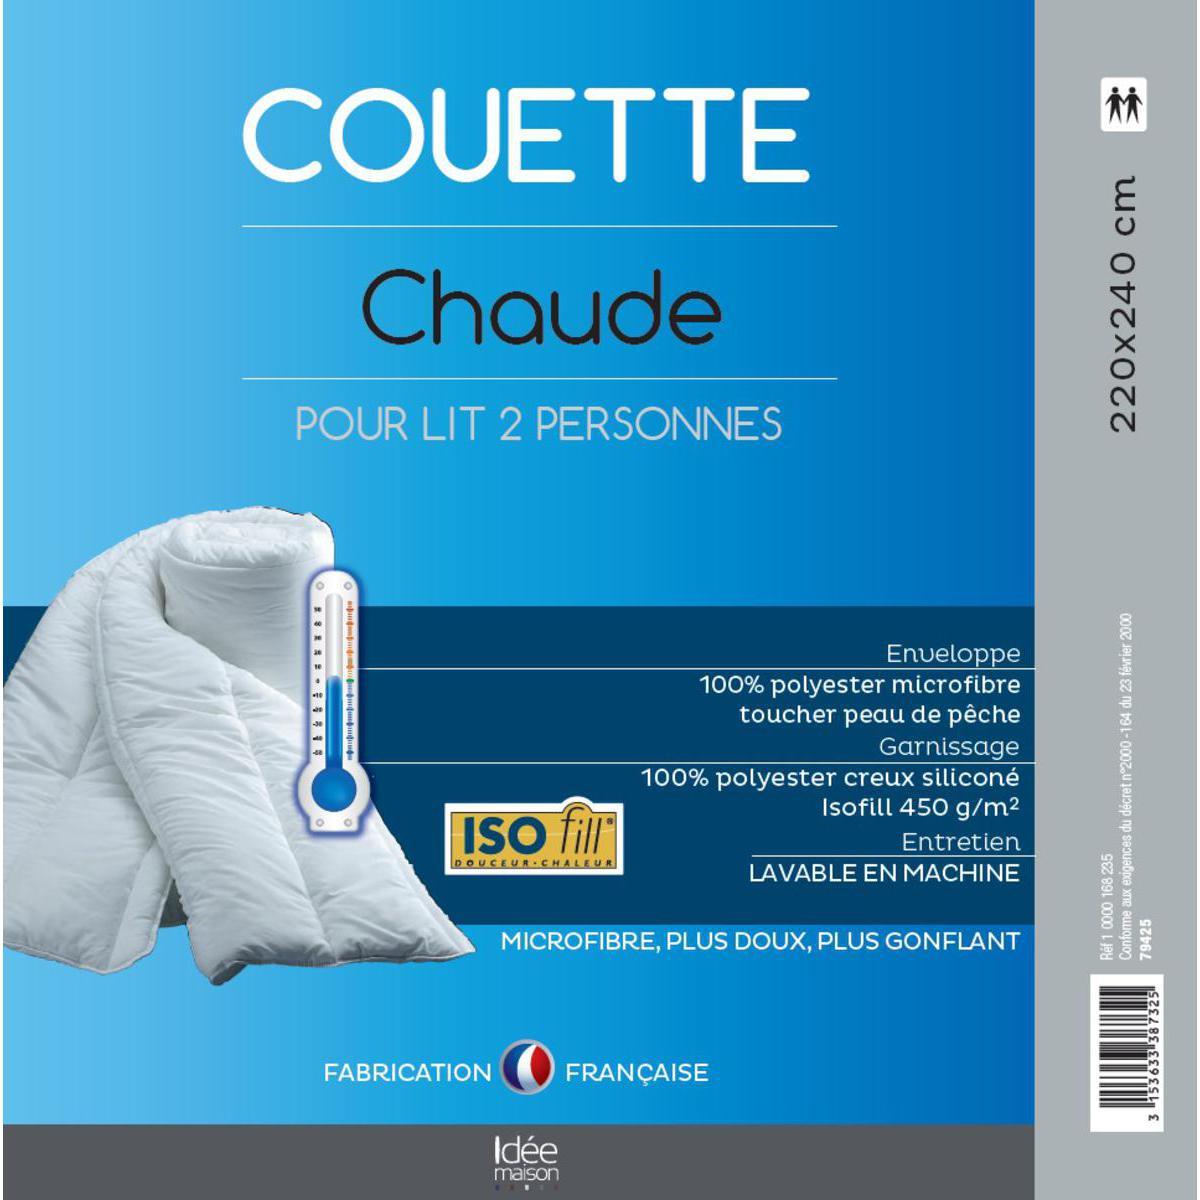 Couette chaude - 100 % polyester - 220 x 240 cm - Blanc